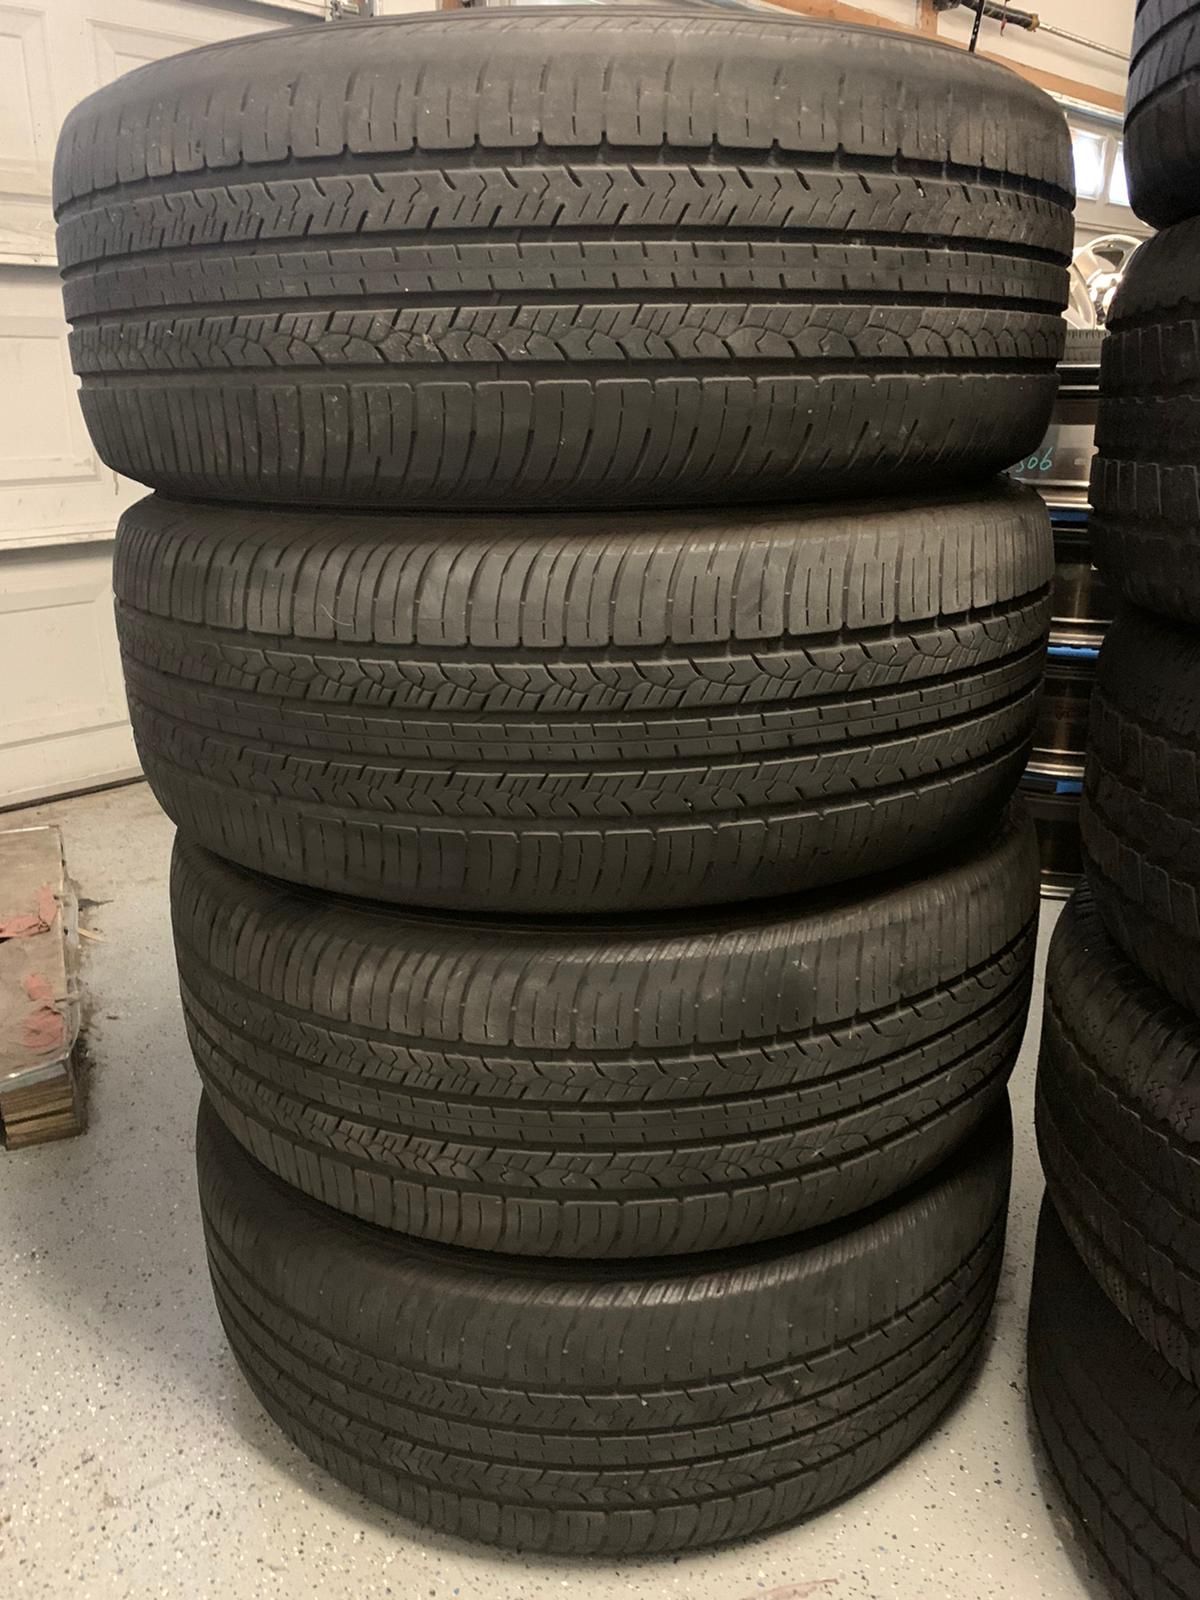 Set of good year assurance c2 fuel max size 265/65/18 with around 30% tread left selling tires only no installation